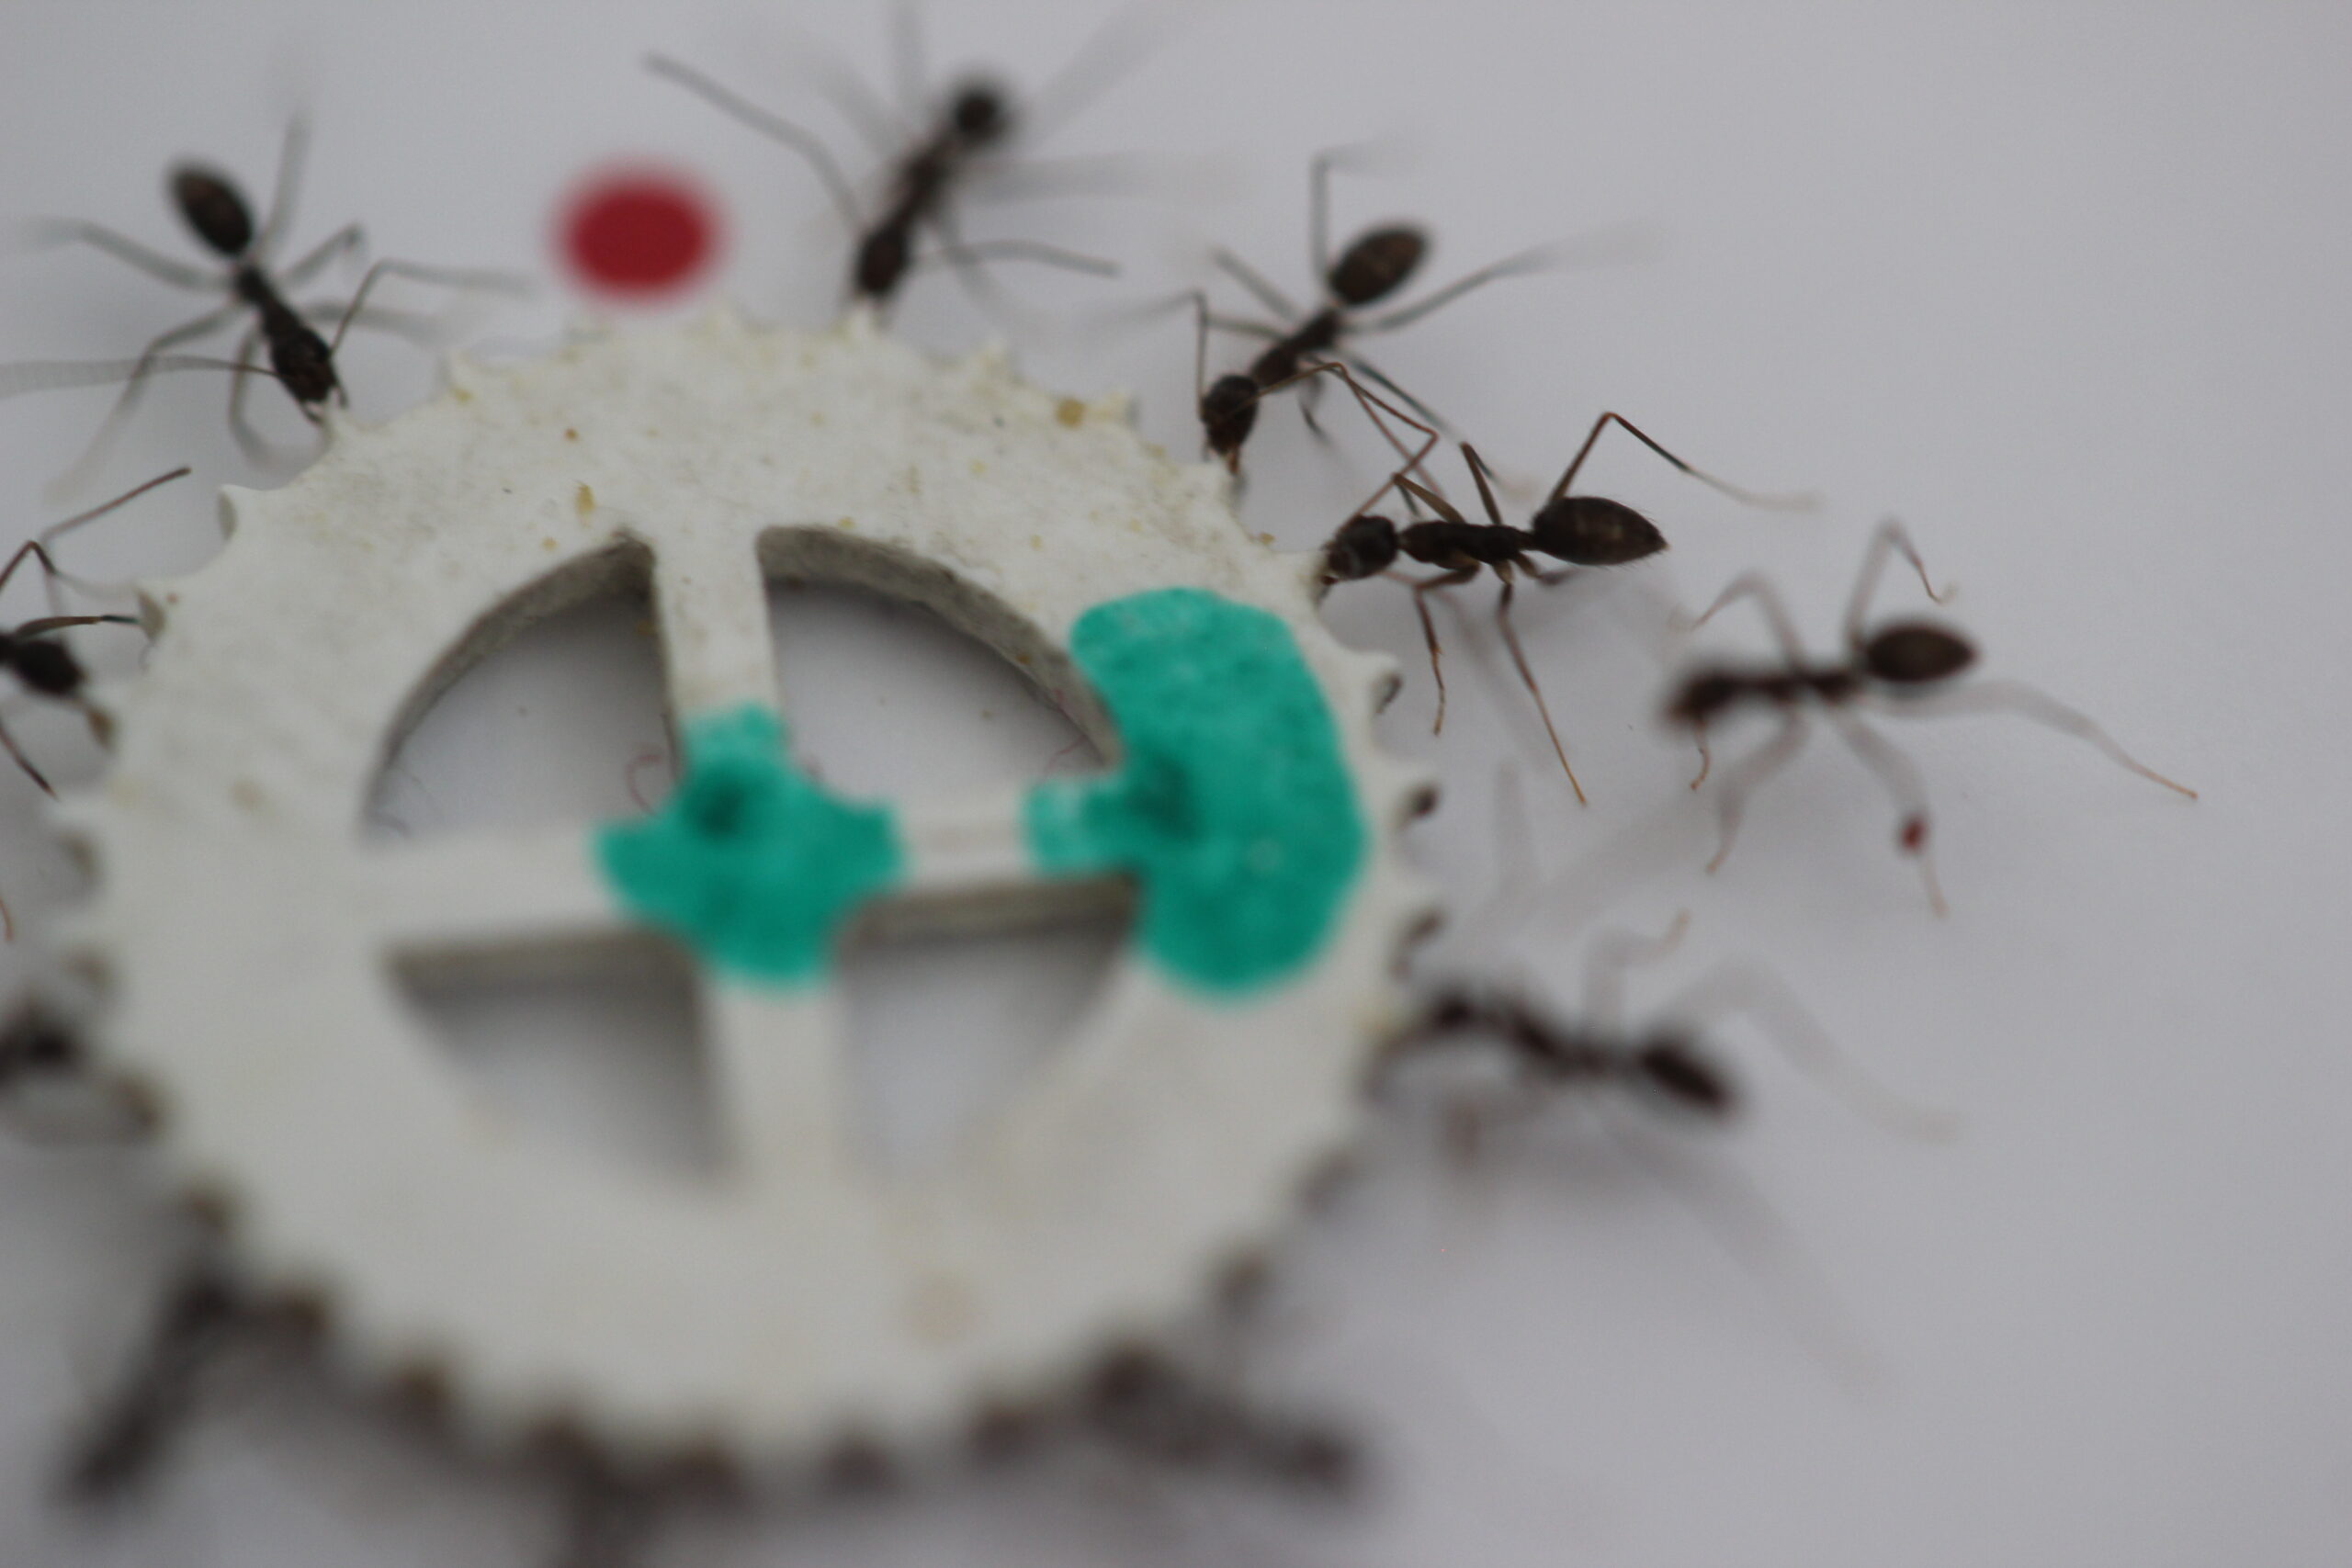 Crazy Ants Cooperate To Carry Food